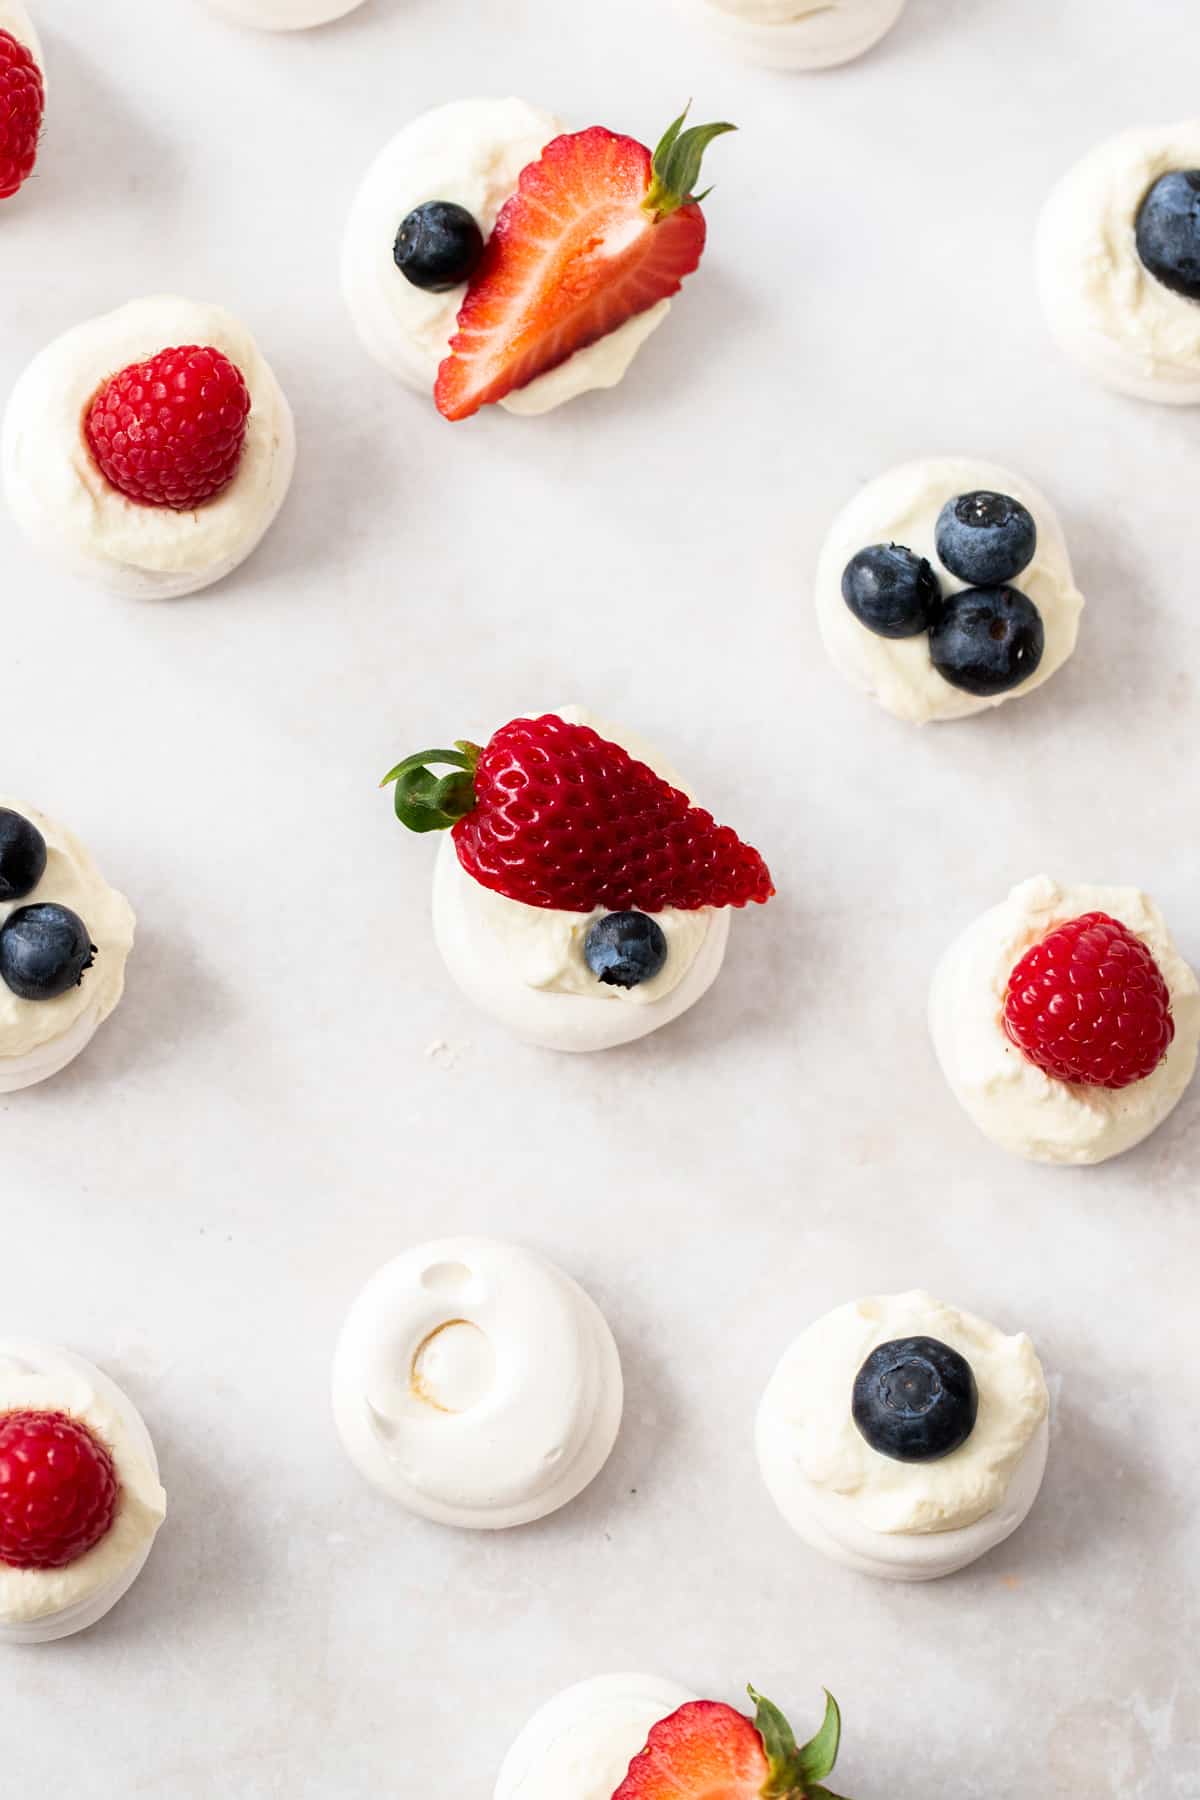 Overhead shot of mini meringue nests filled with cream and berries.